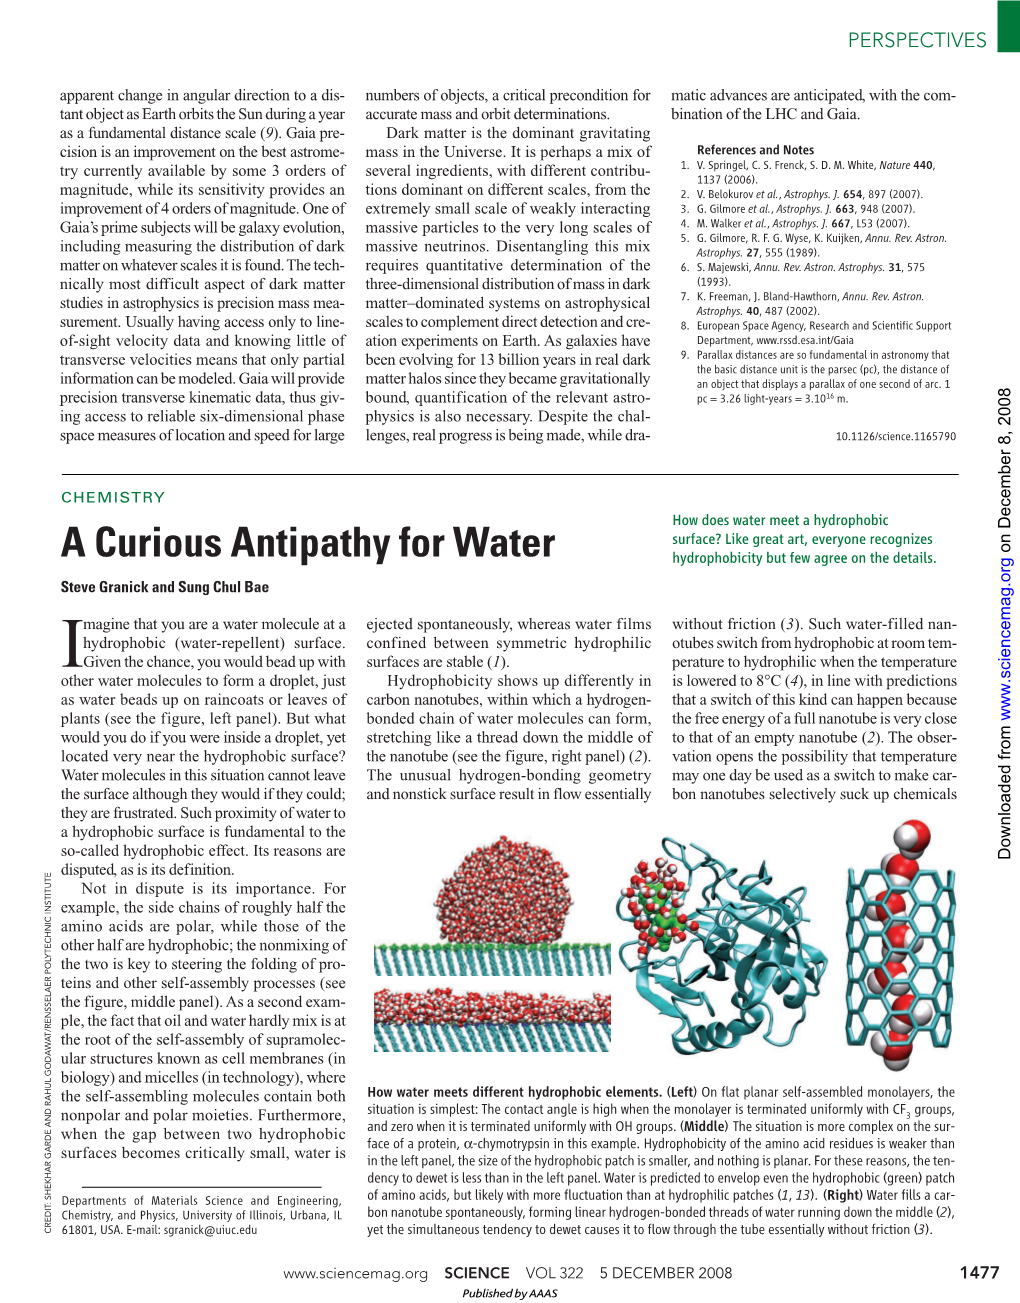 A Curious Antipathy for Water Hydrophobicity but Few Agree on the Details